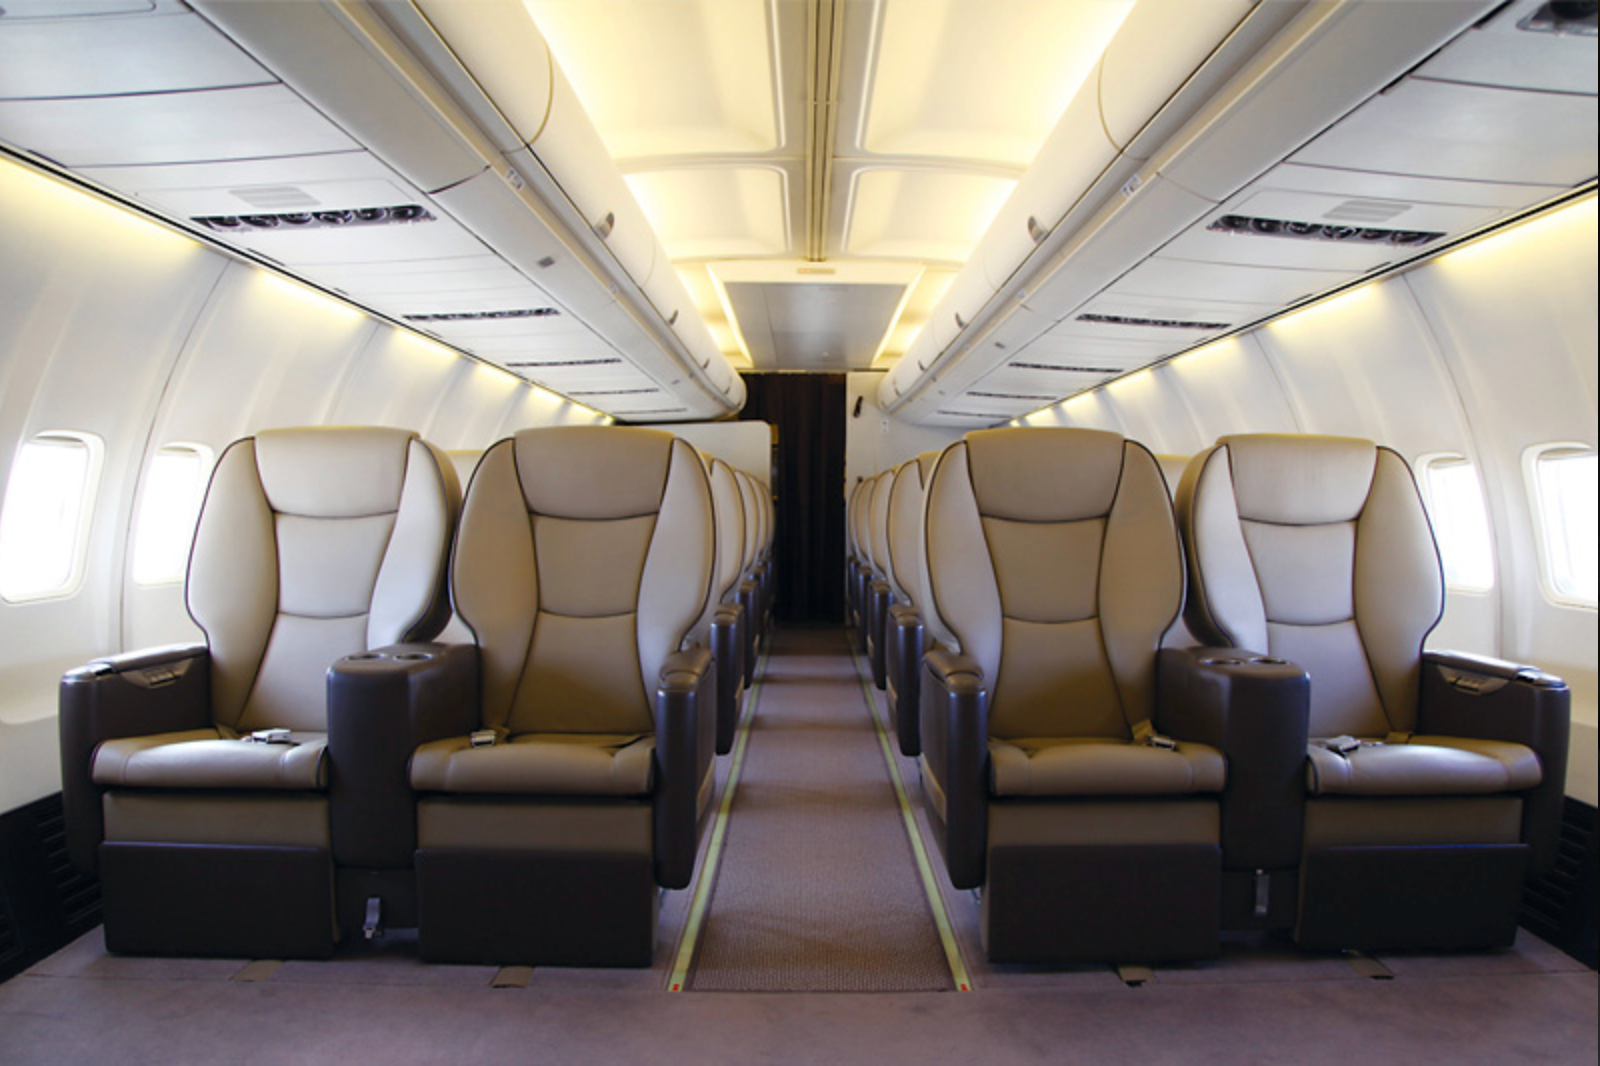 The seats on the Boeing 757 recline for comfort